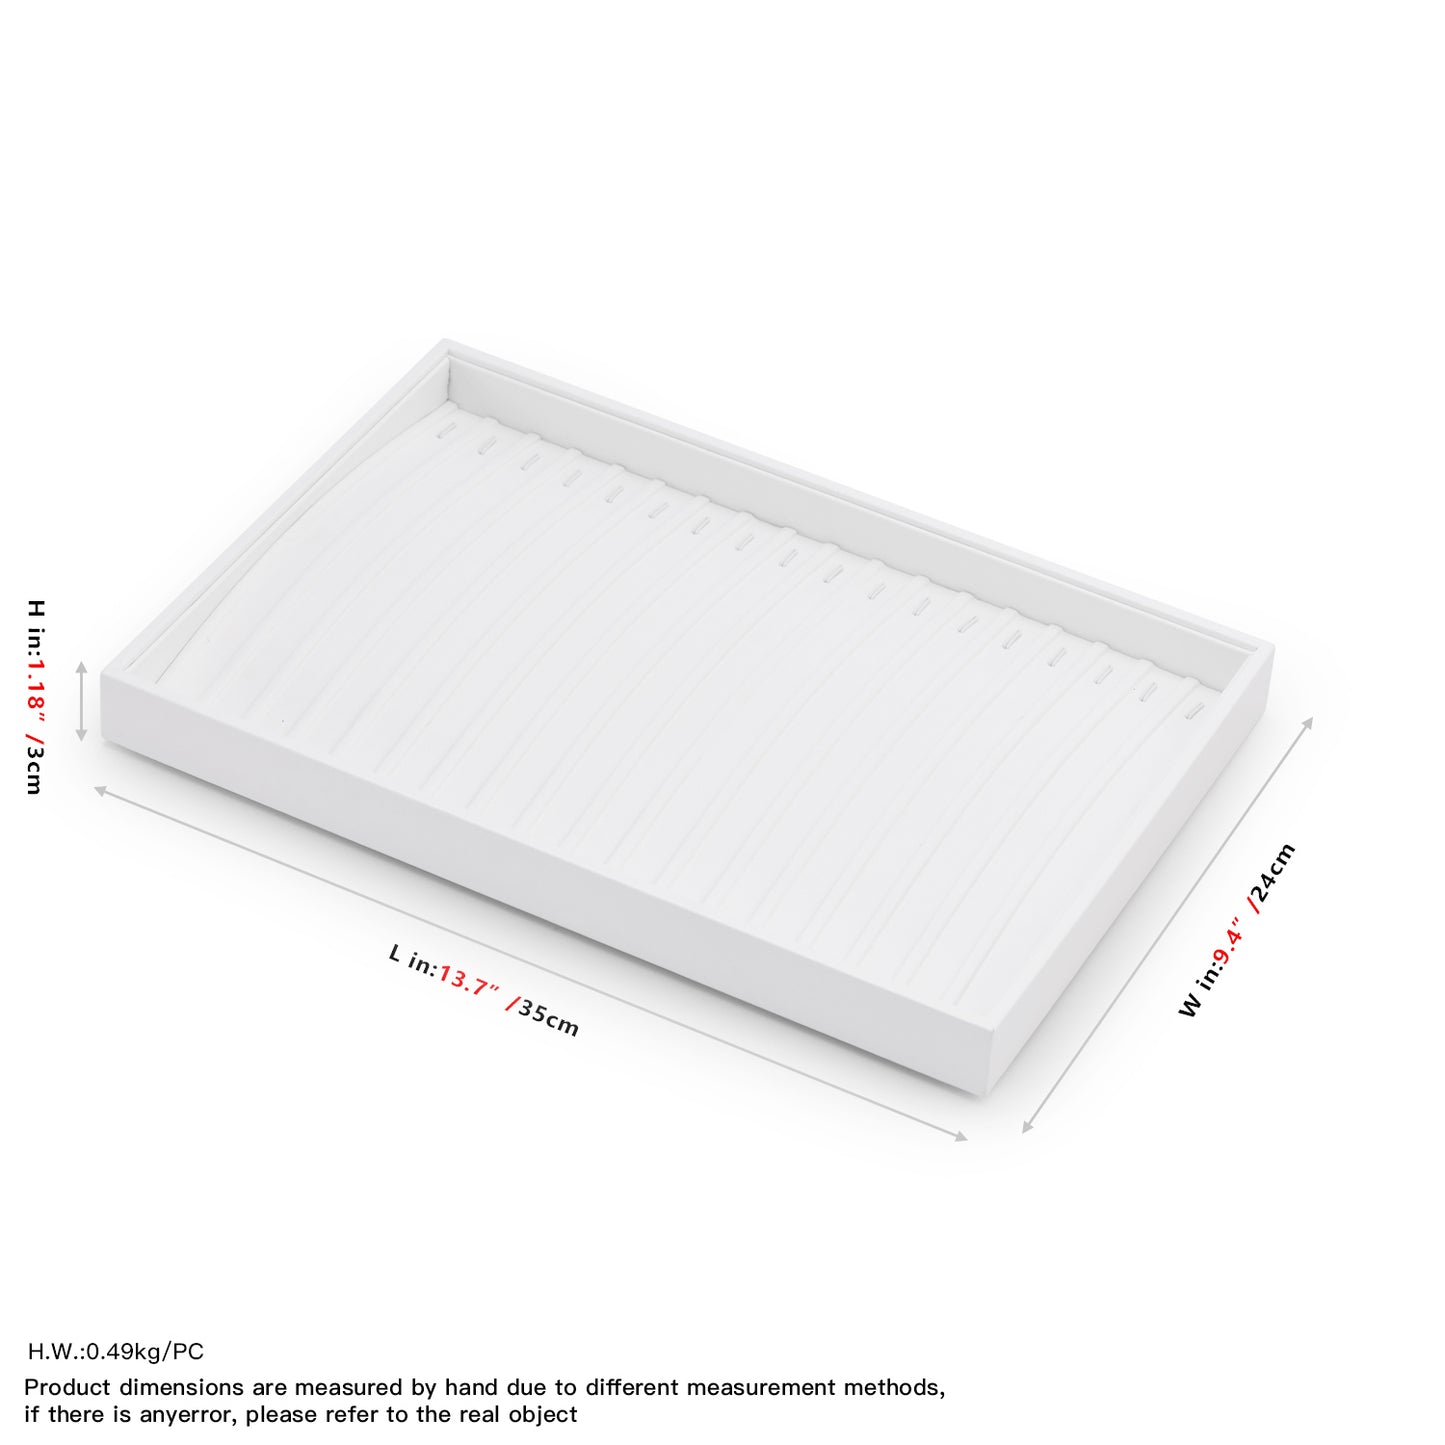 New White Stackable PU Leather Jewelry Display Tray P128